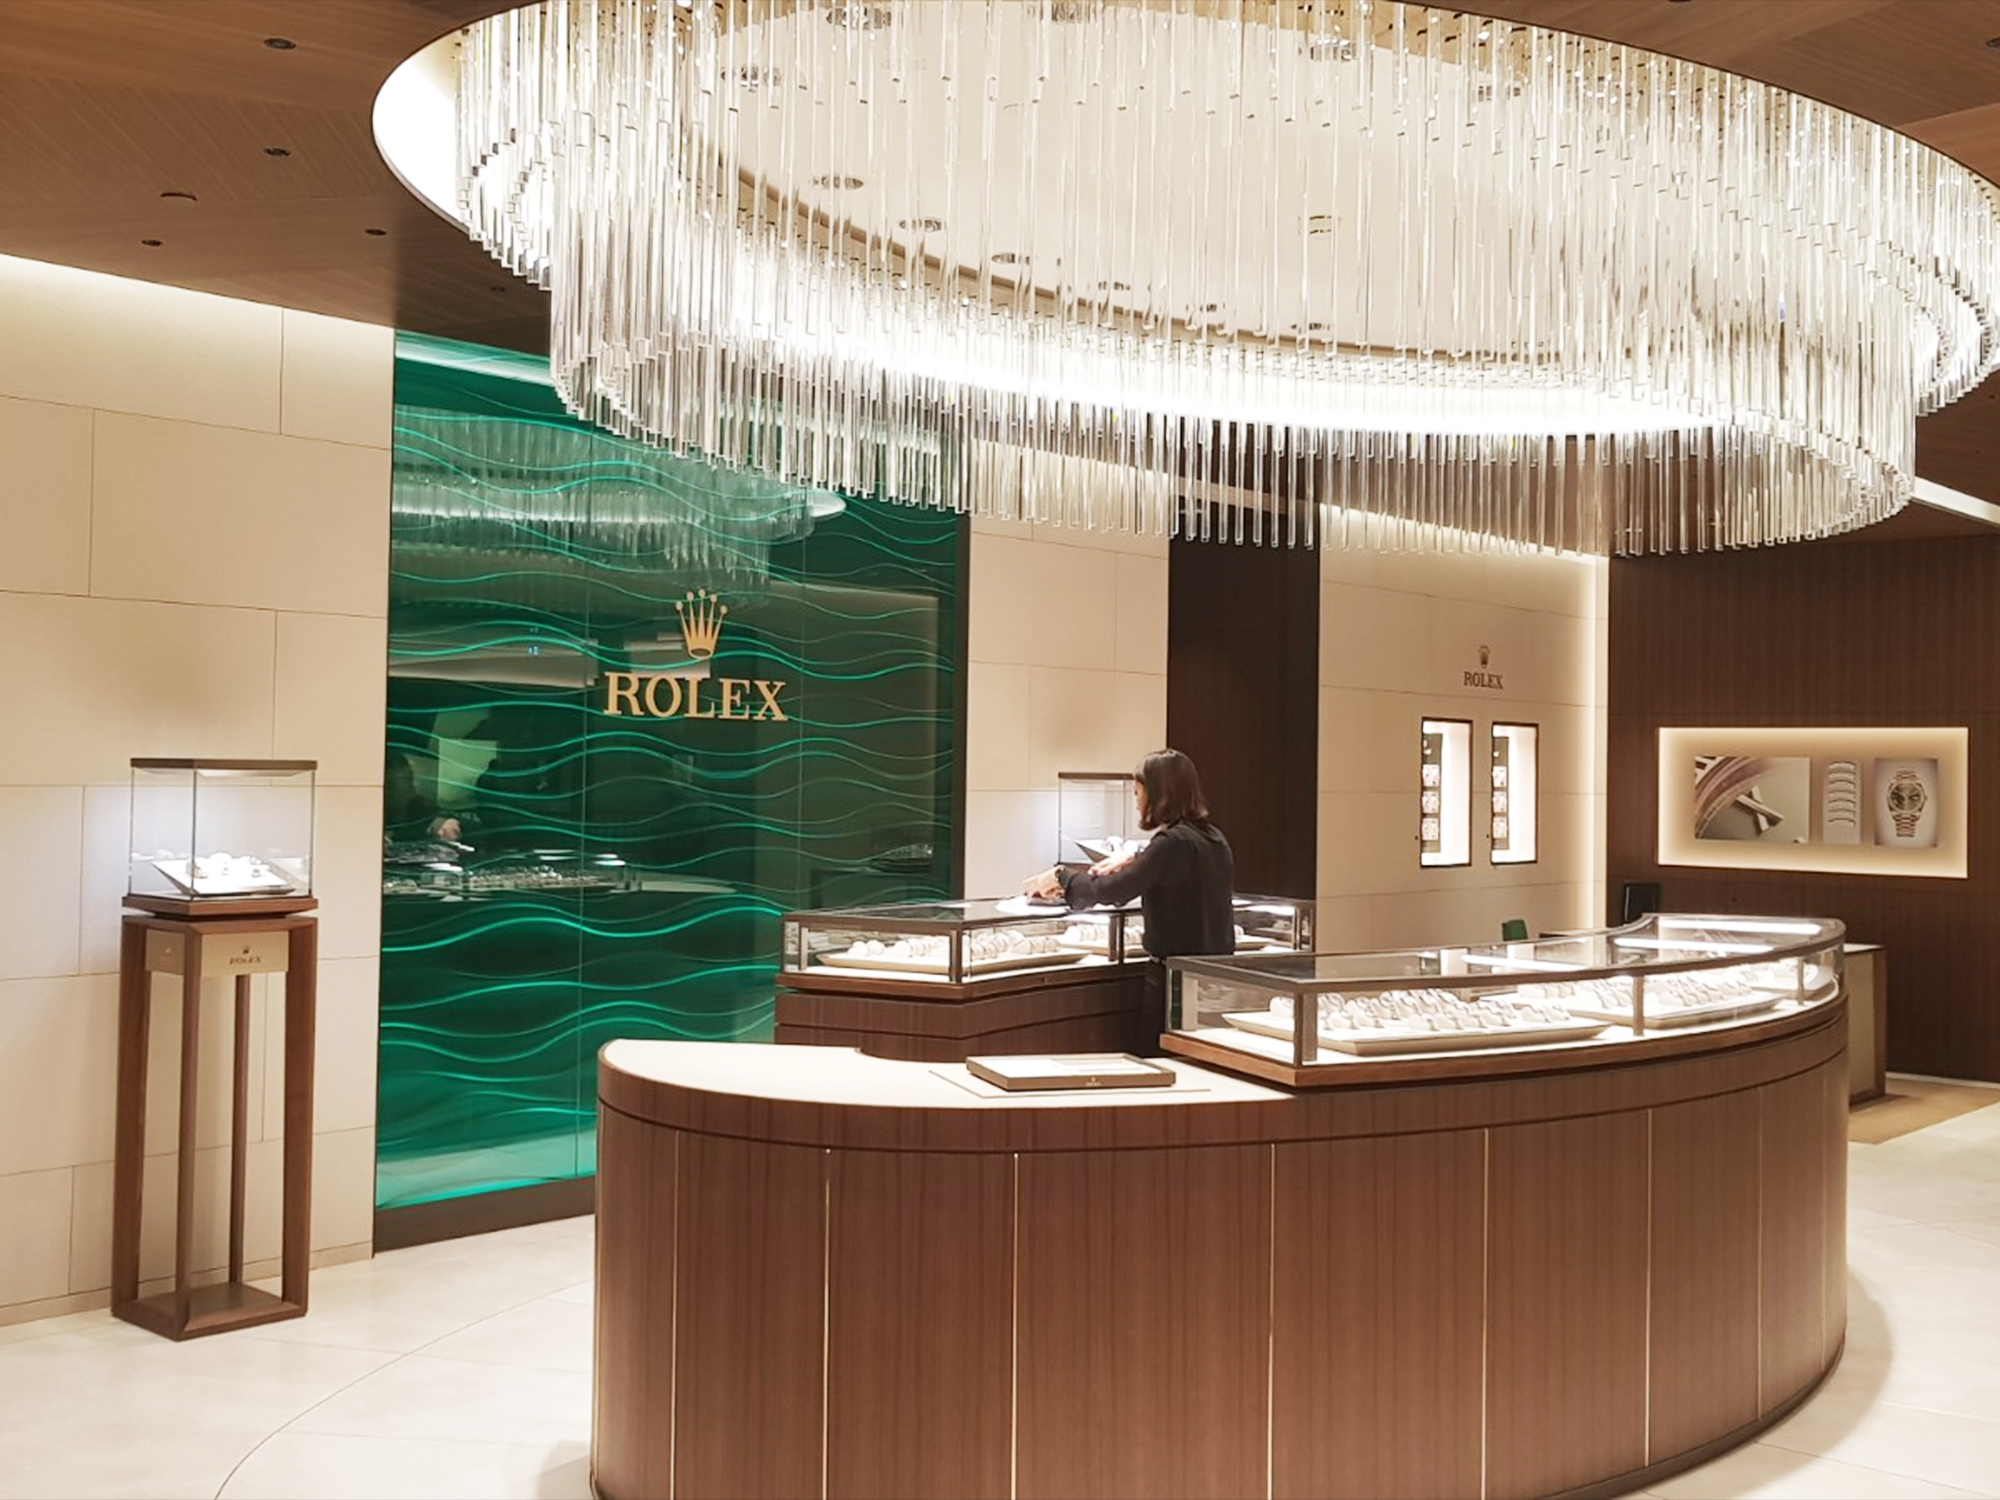 Take A Tour Of Rolex's Newly Opened Showroom In Harrods Fine Watch Room